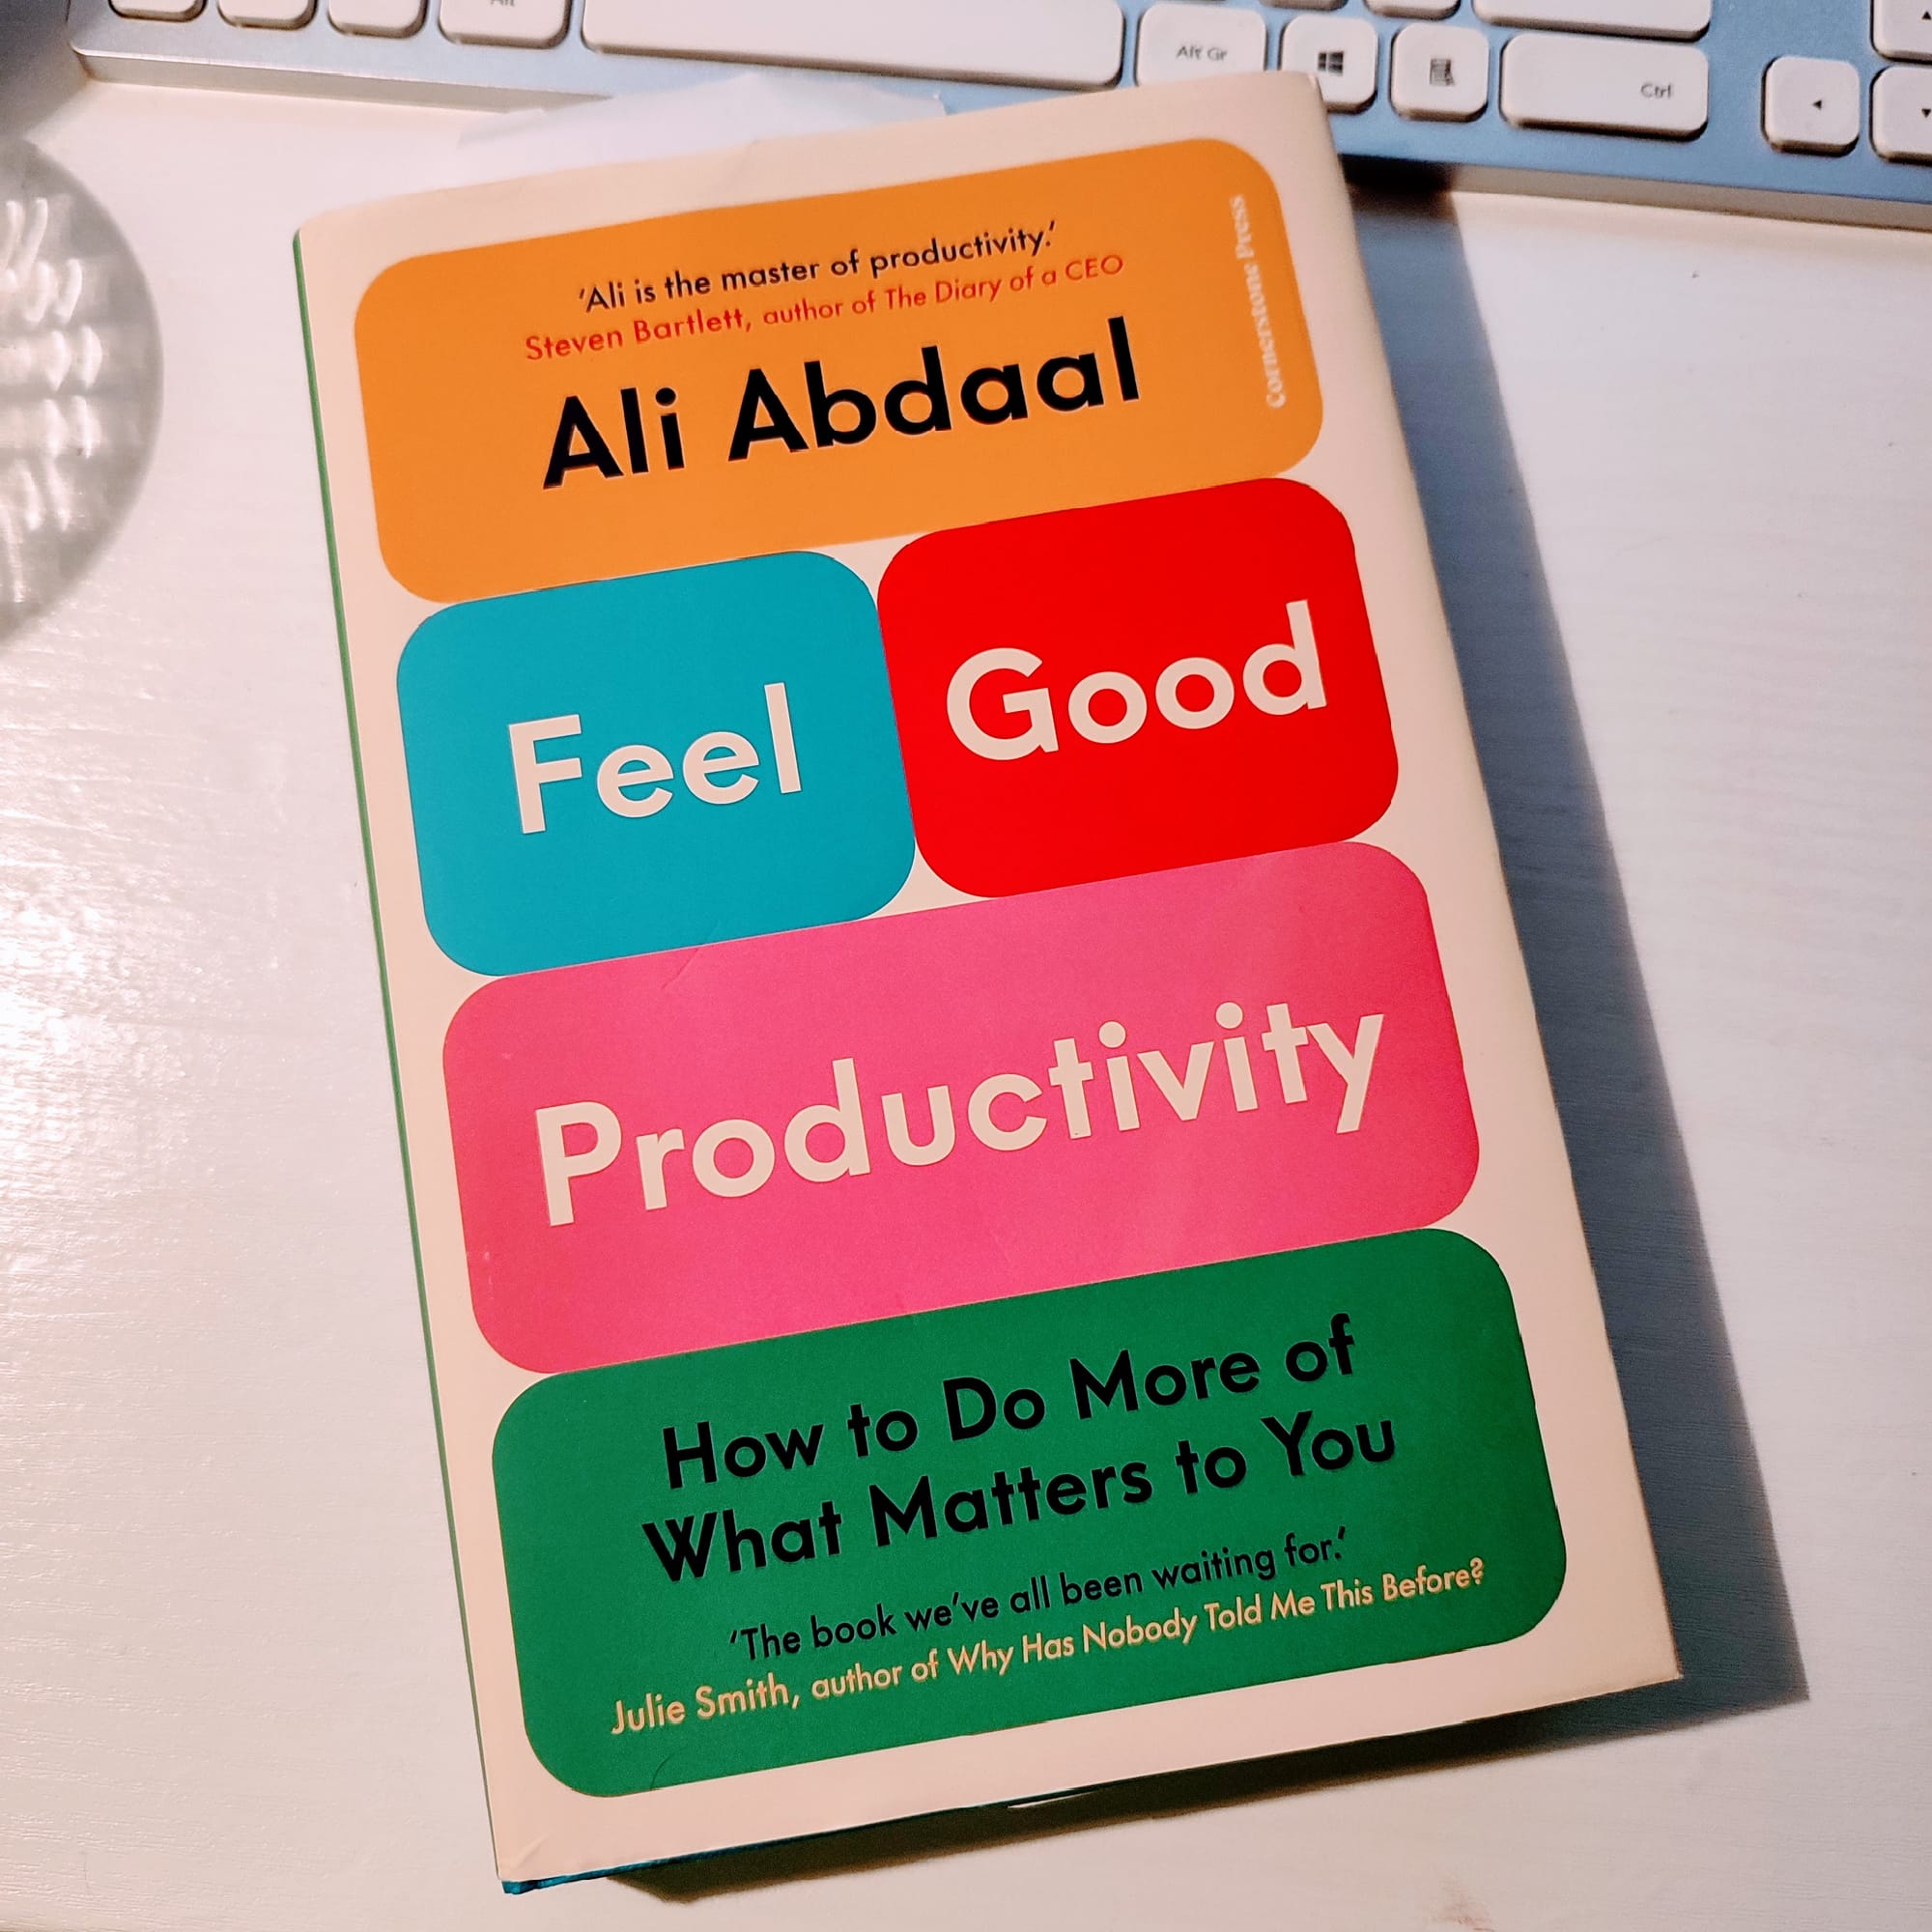 Colourful book cover of Ali Abdaal's book Feel Good Productivity with its Notion style blocks of text and colour.